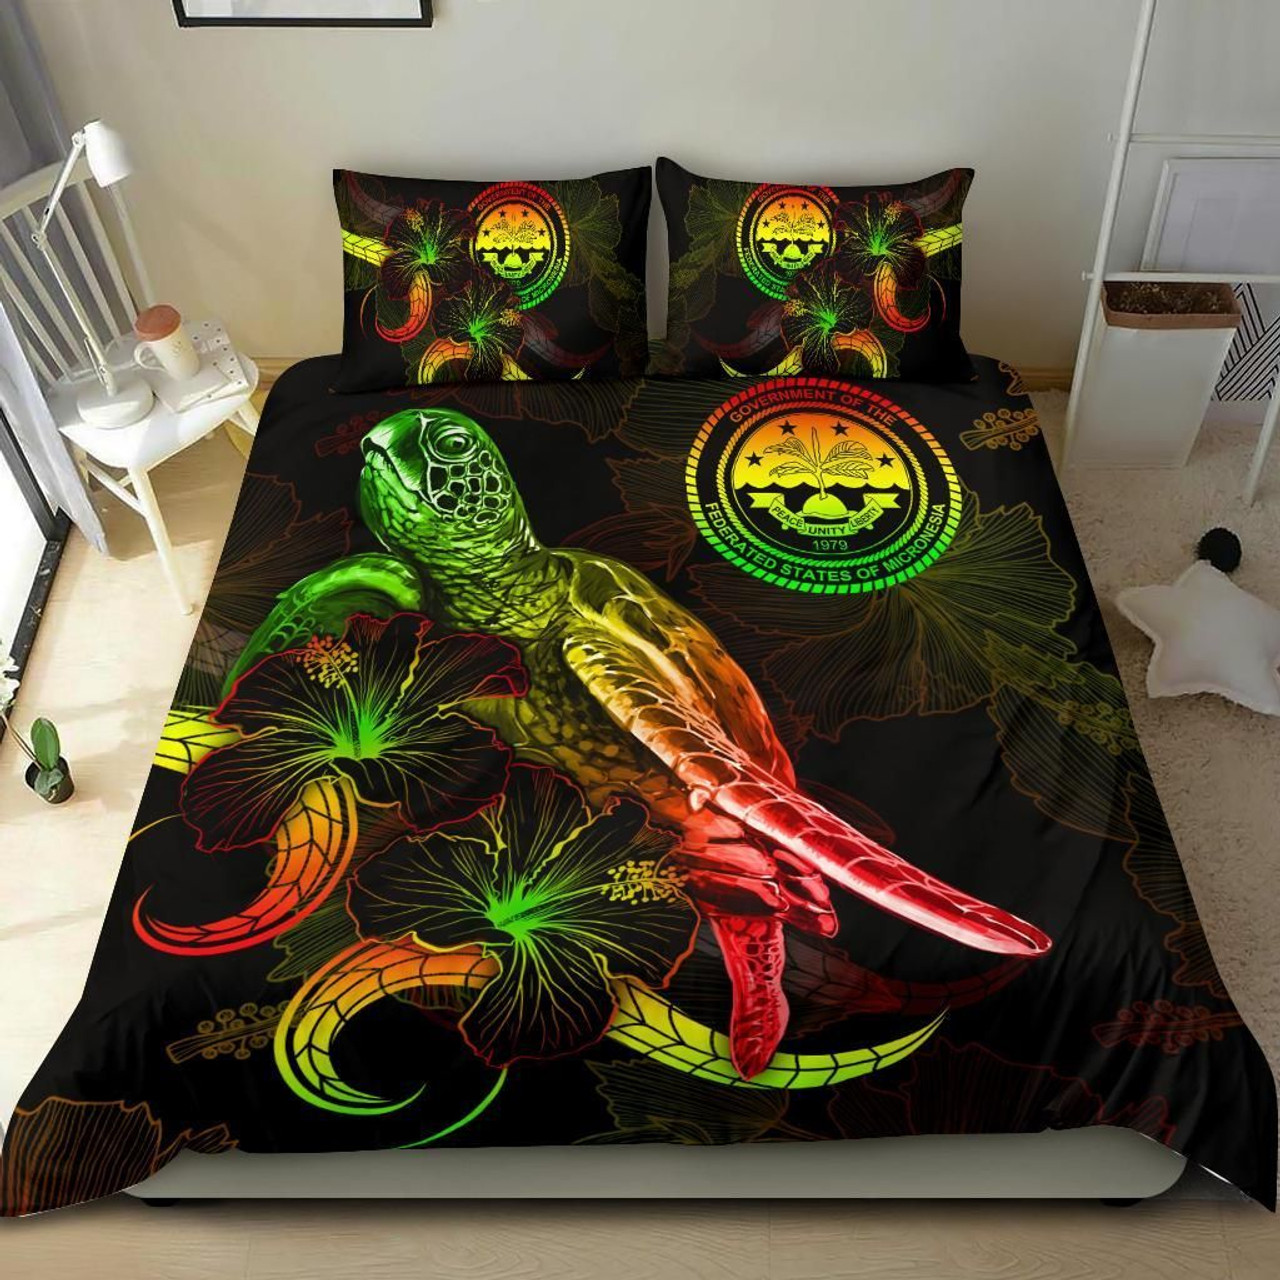 Federated States Of Micronesia Polynesian Bedding Set - Turtle With Blooming Hibiscus Reggae 2